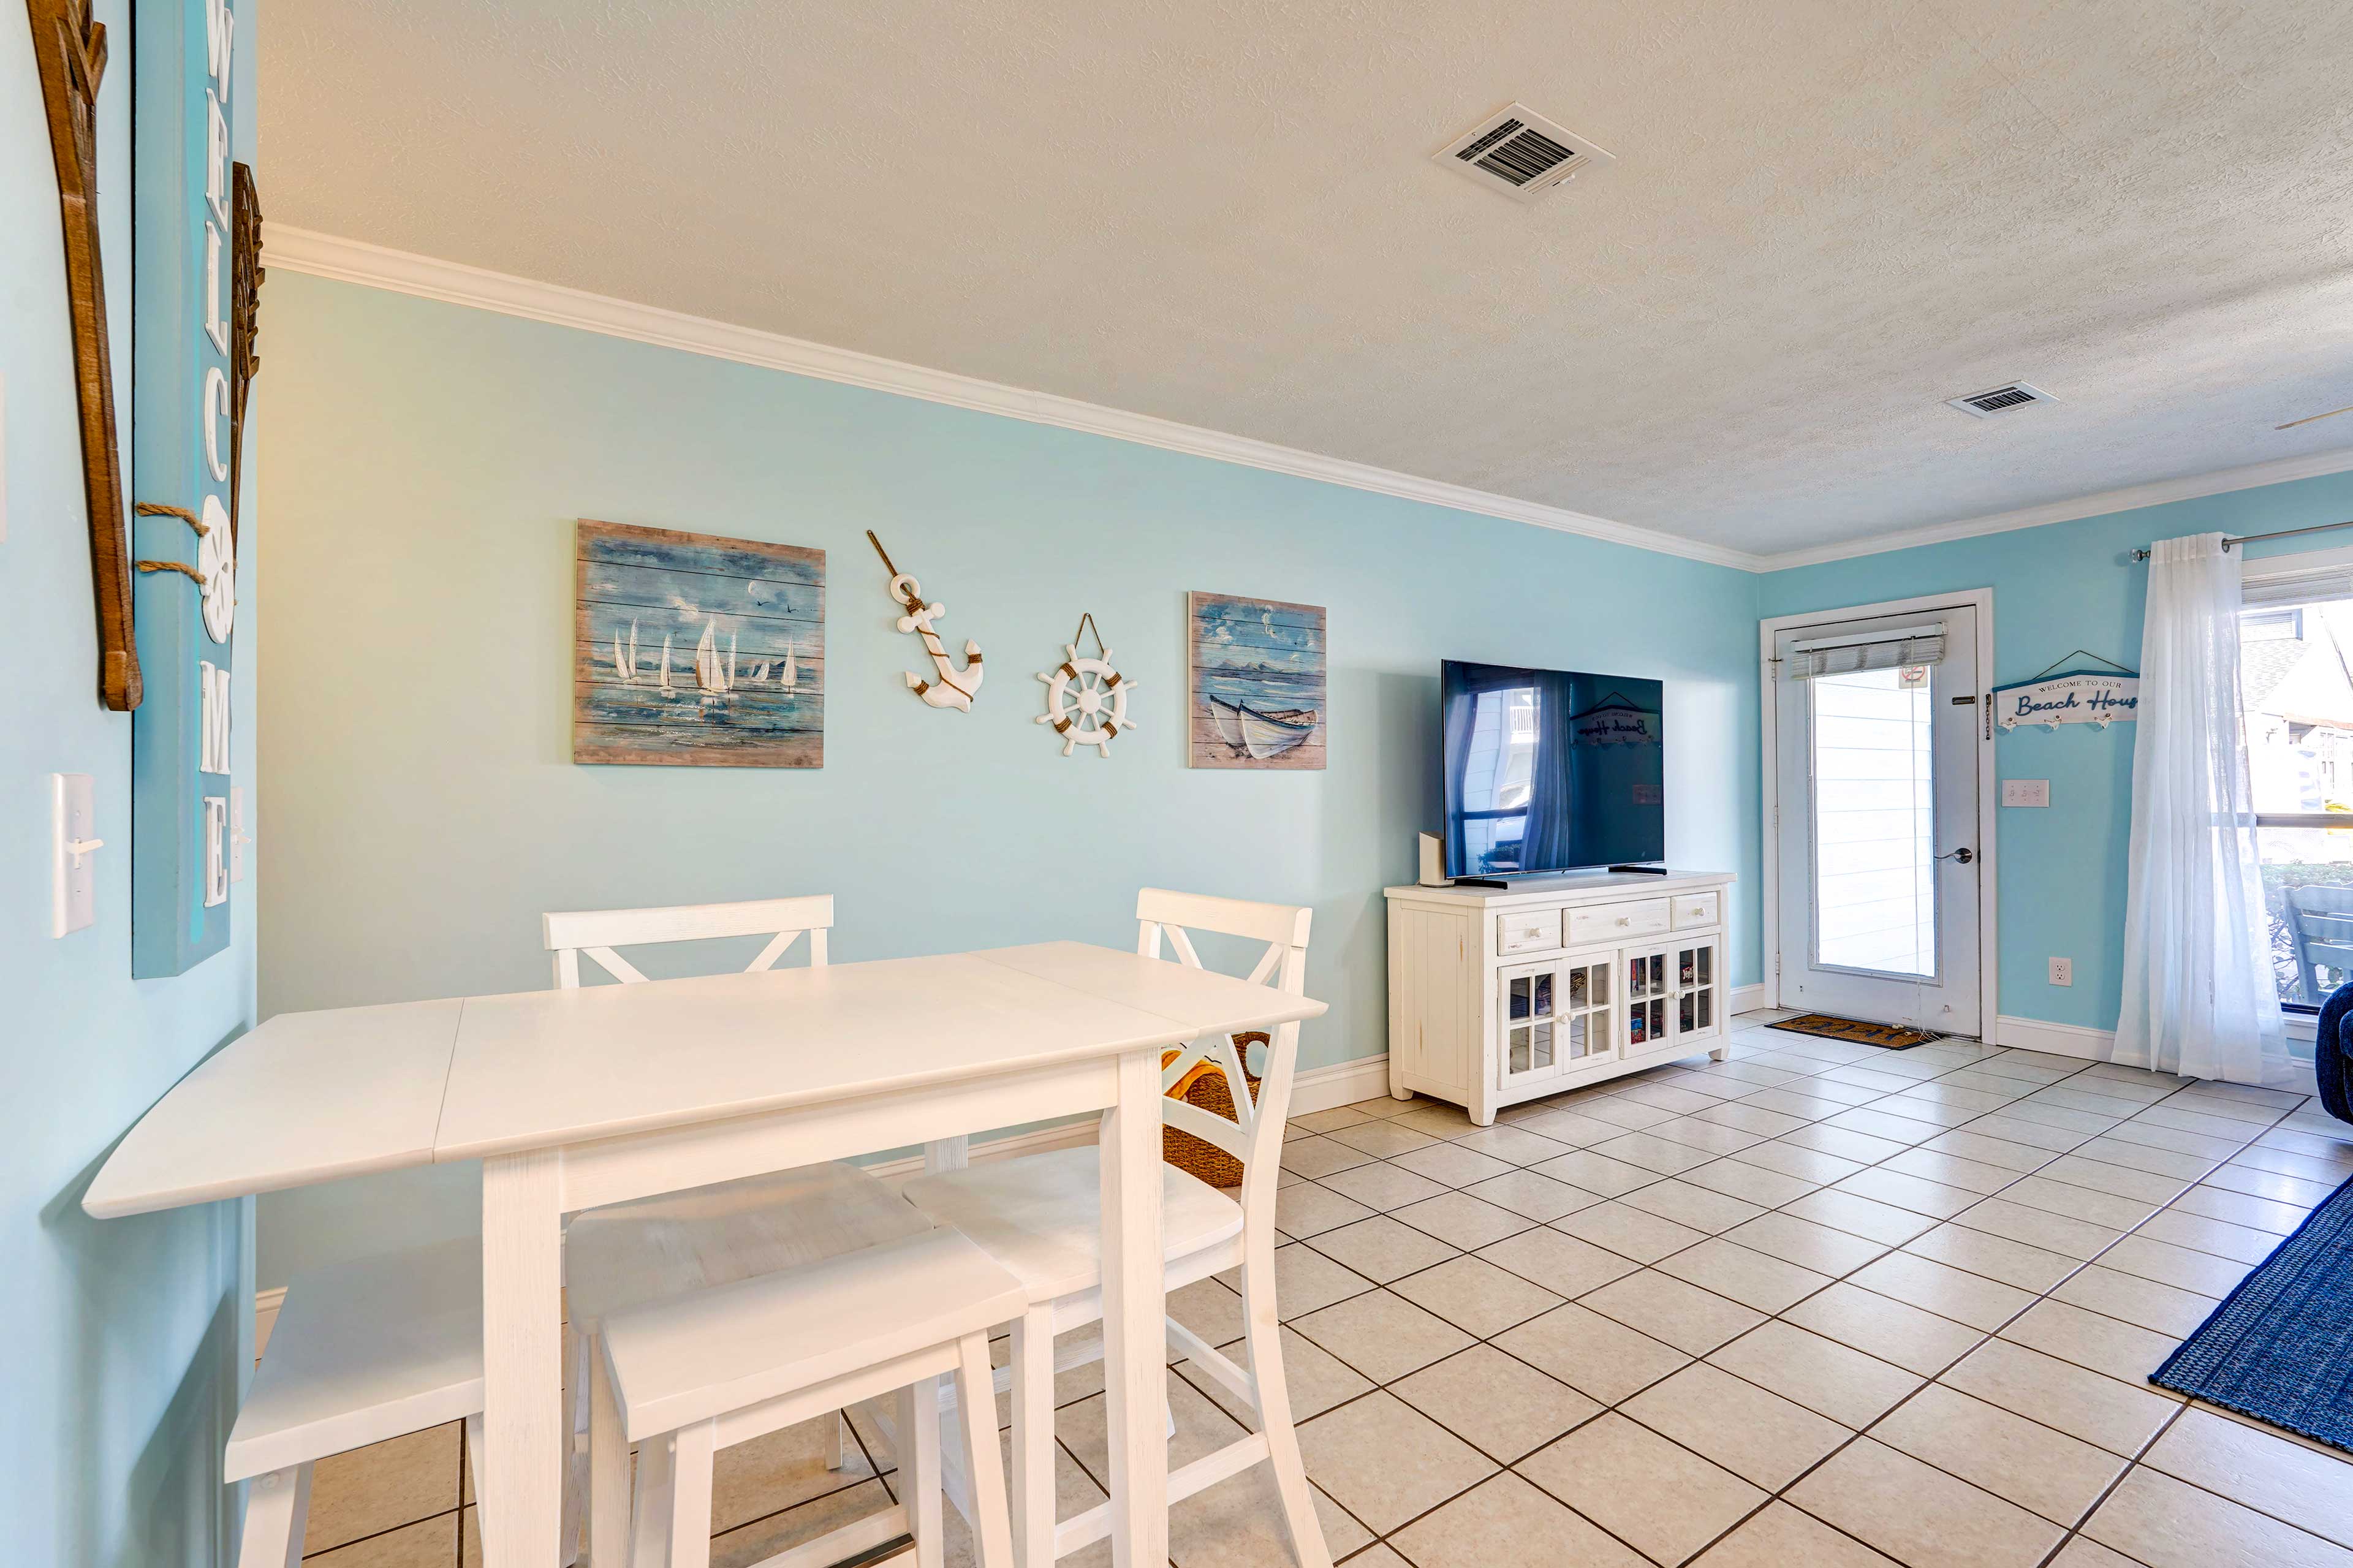 Dining Area | Board Games | Books | Fully Equipped Kitchen